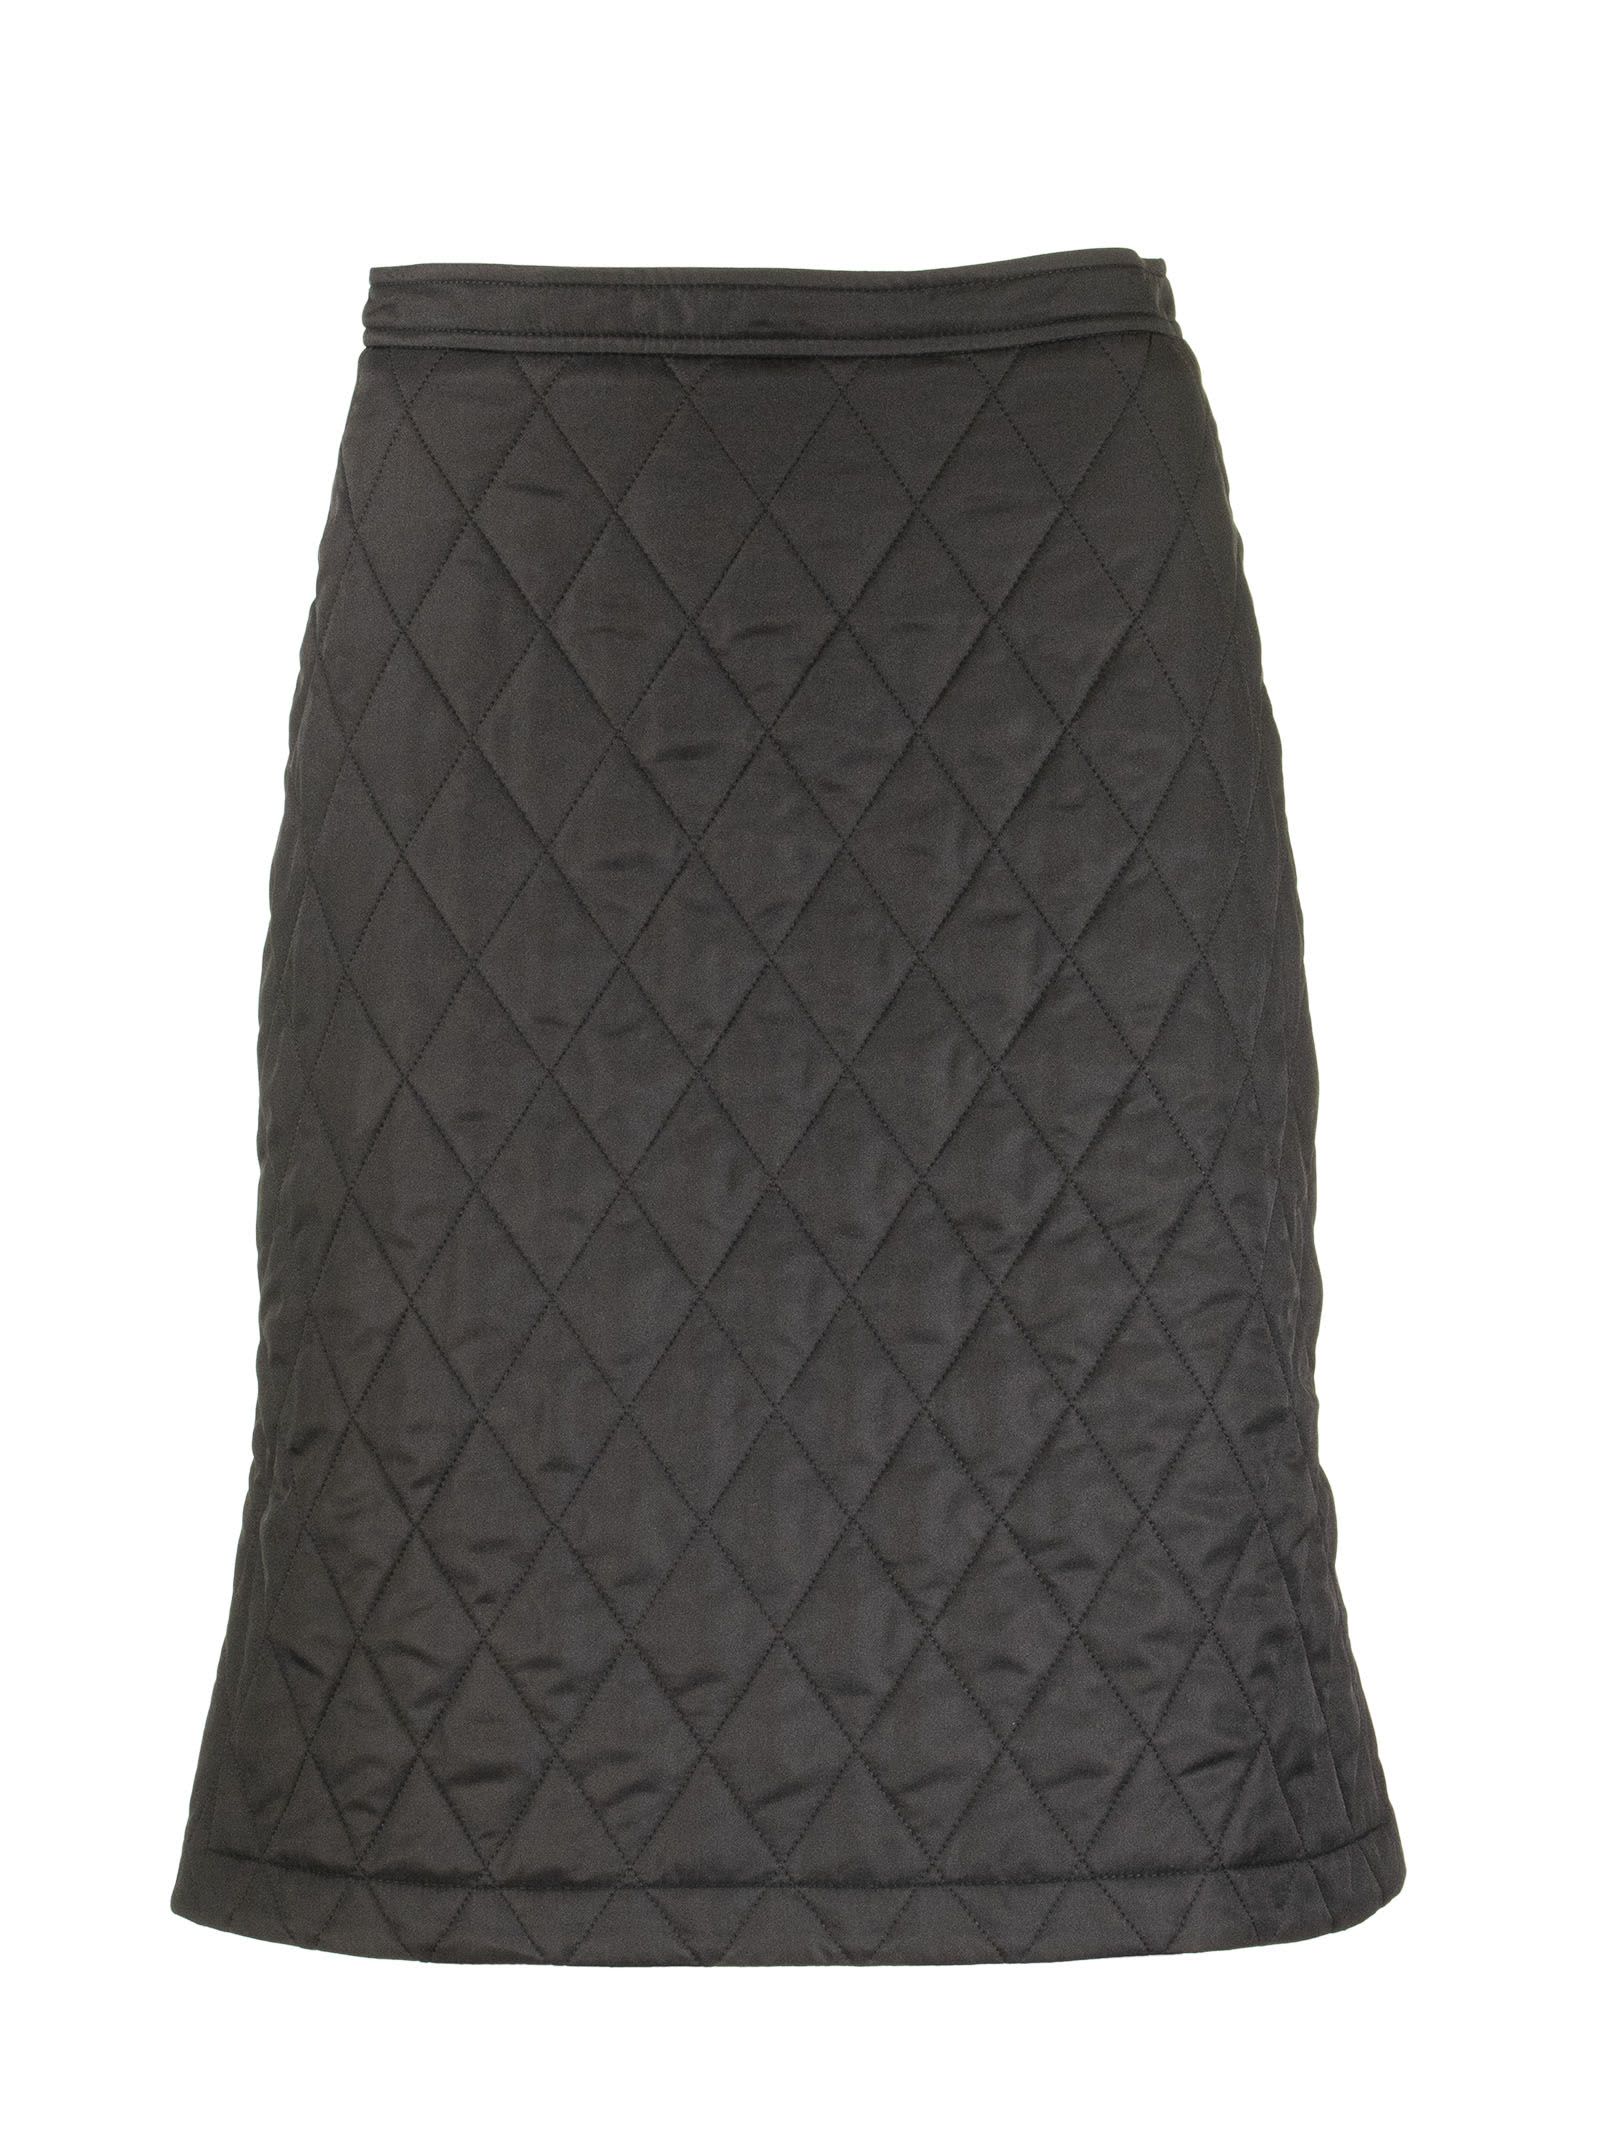 Burberry Gail - Diamond Quilted A-line Skirt